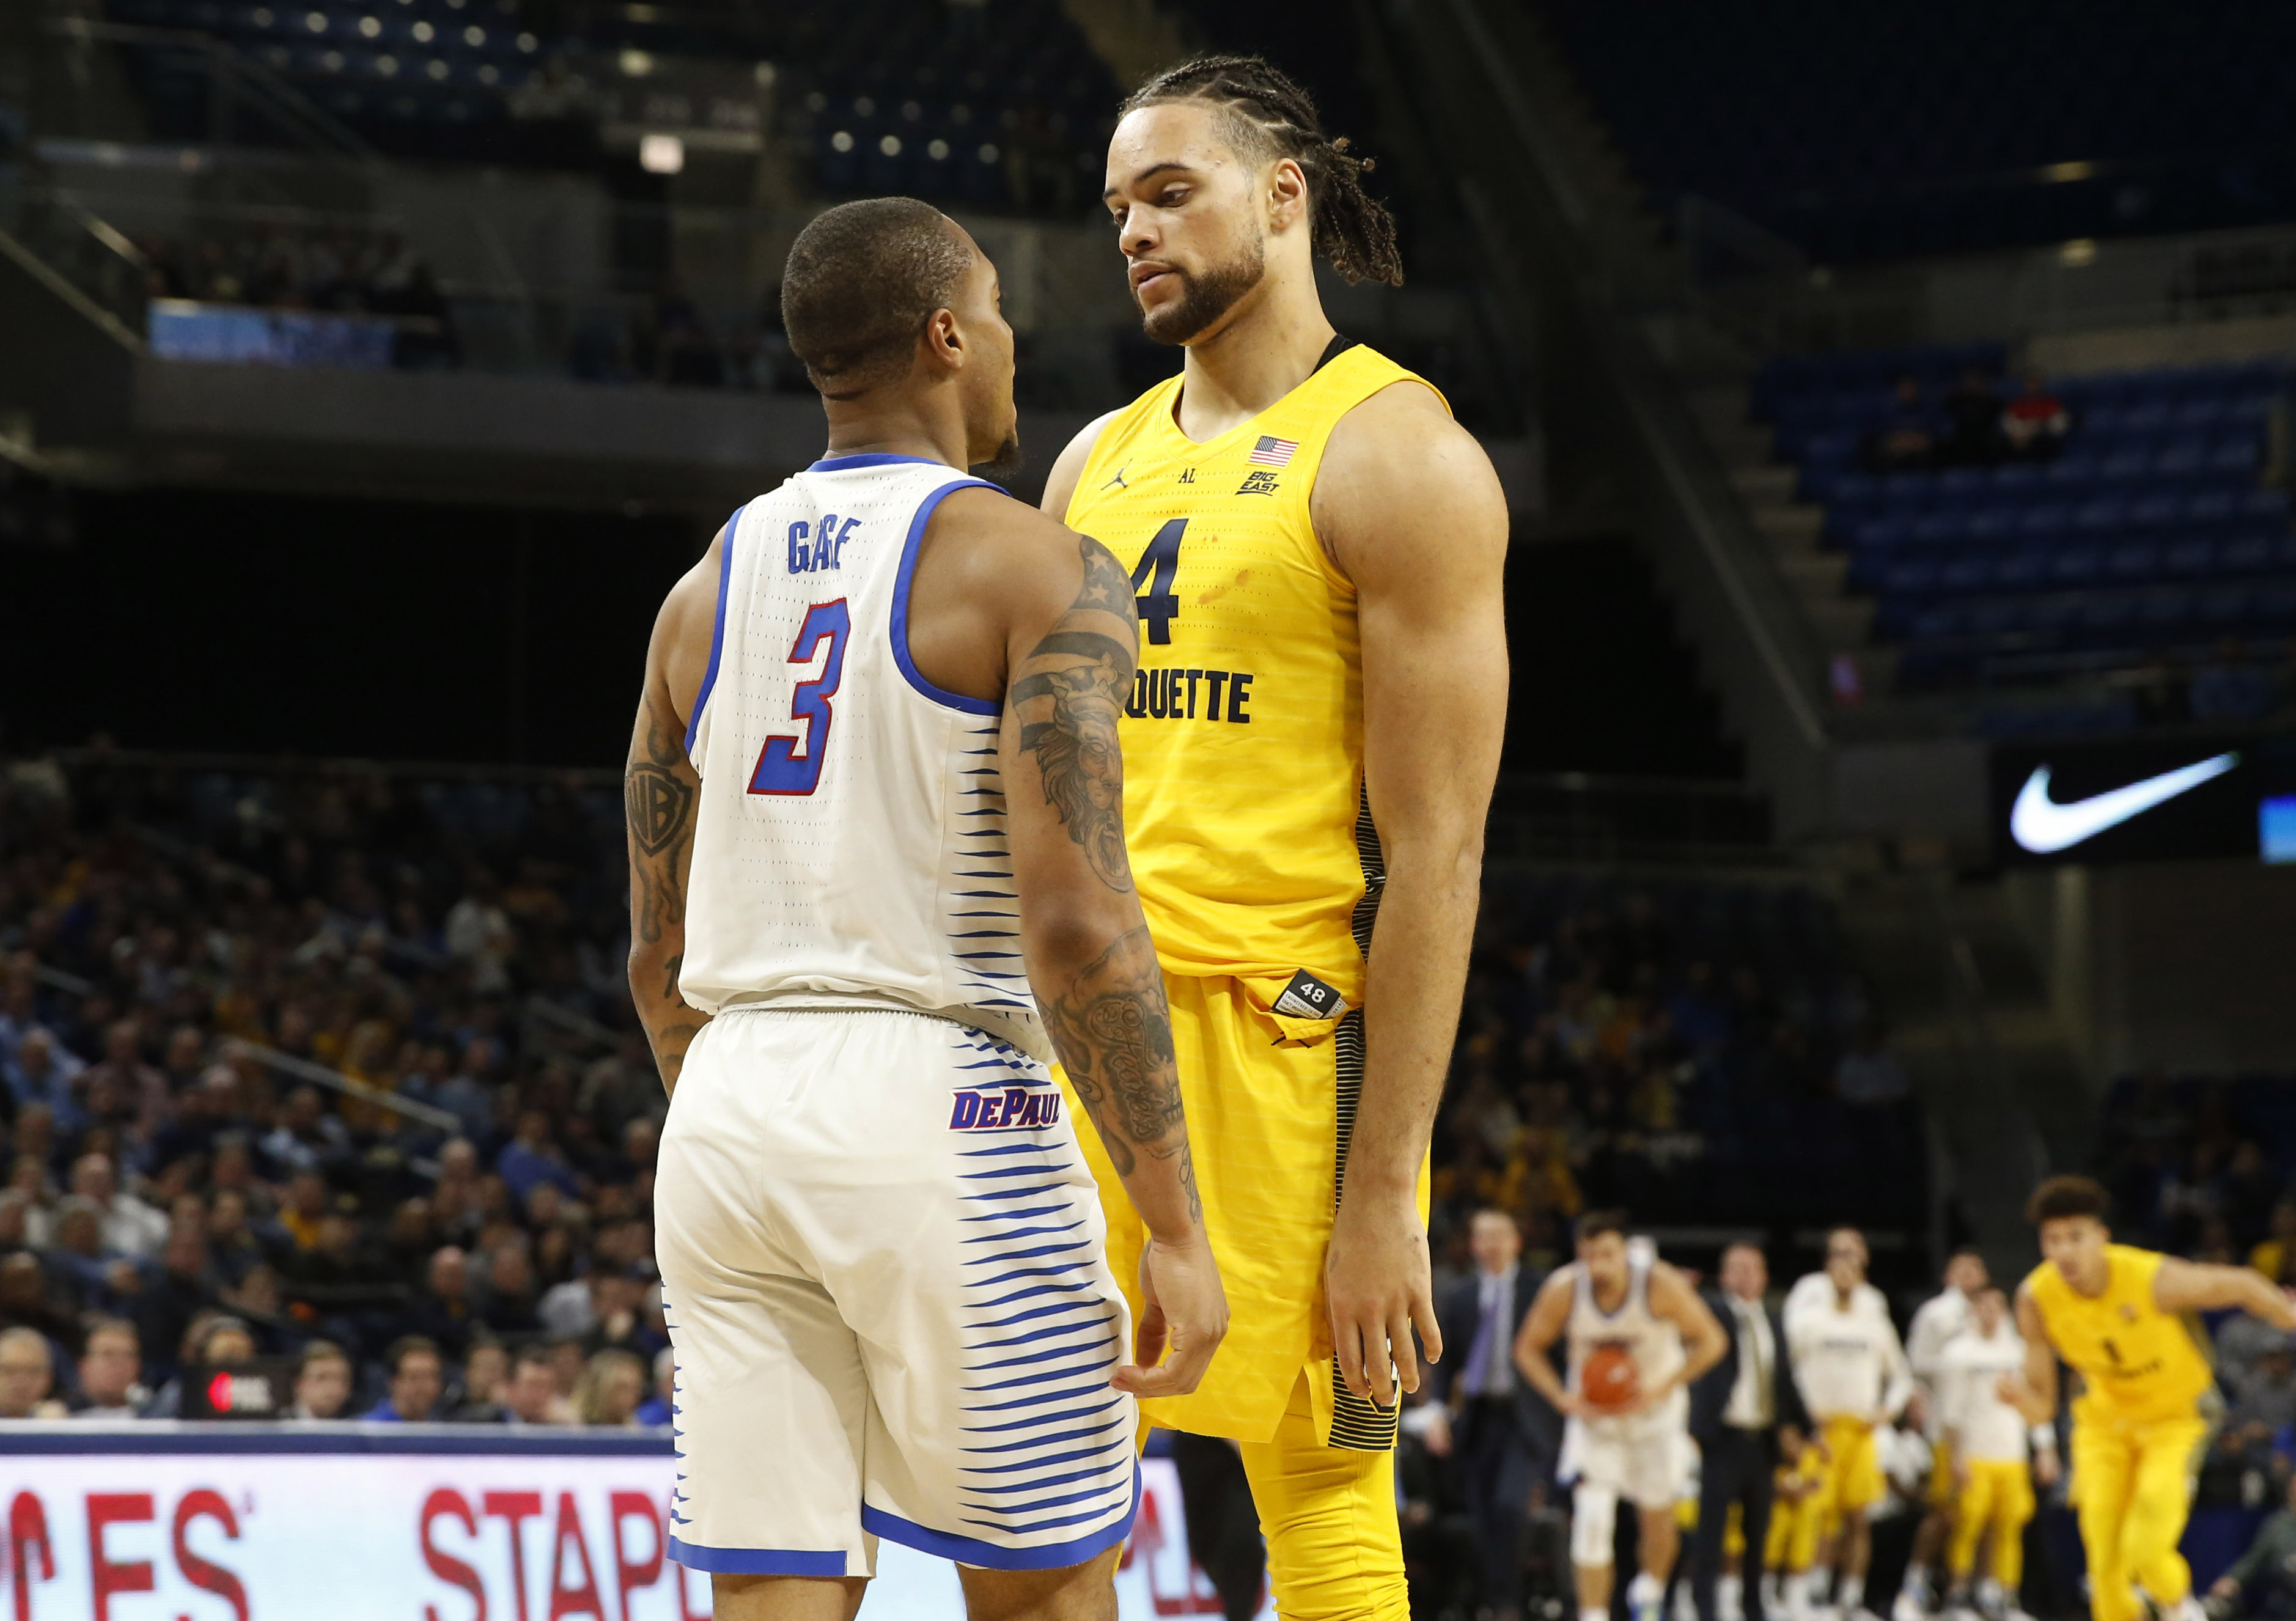 NCAA Basketball: Marquette at DePaul